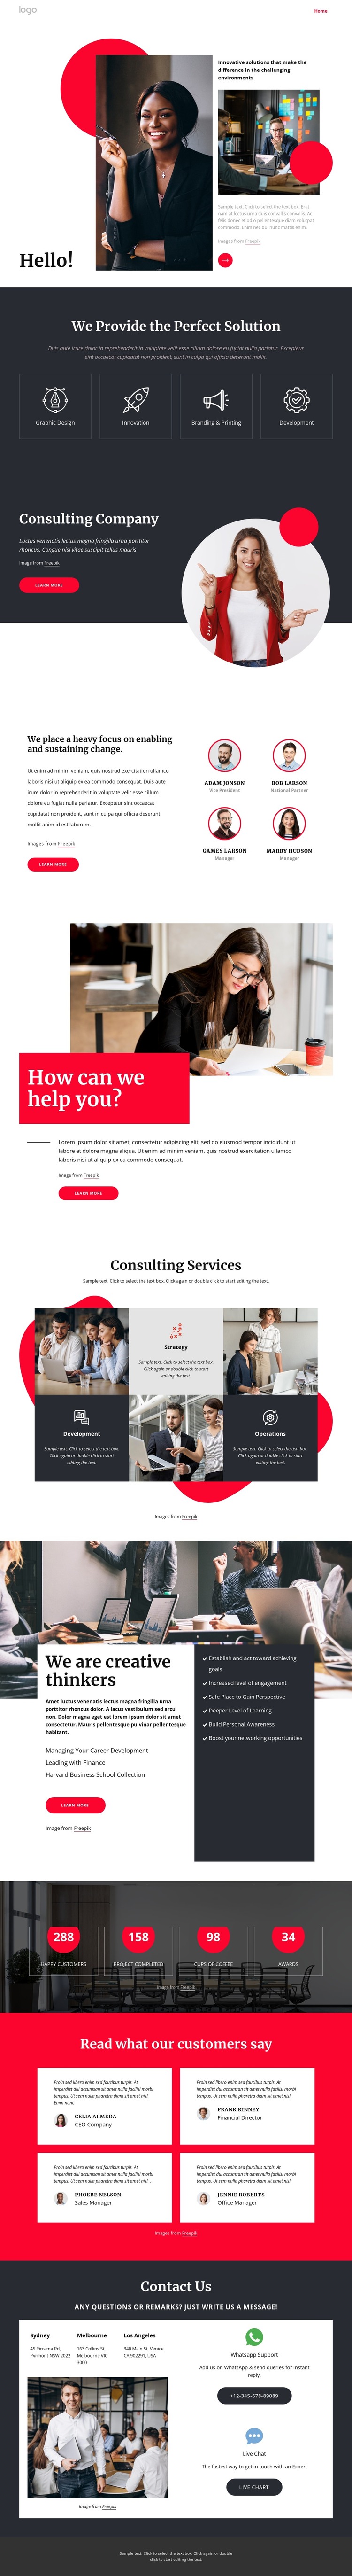 Consulting company NYC HTML Template